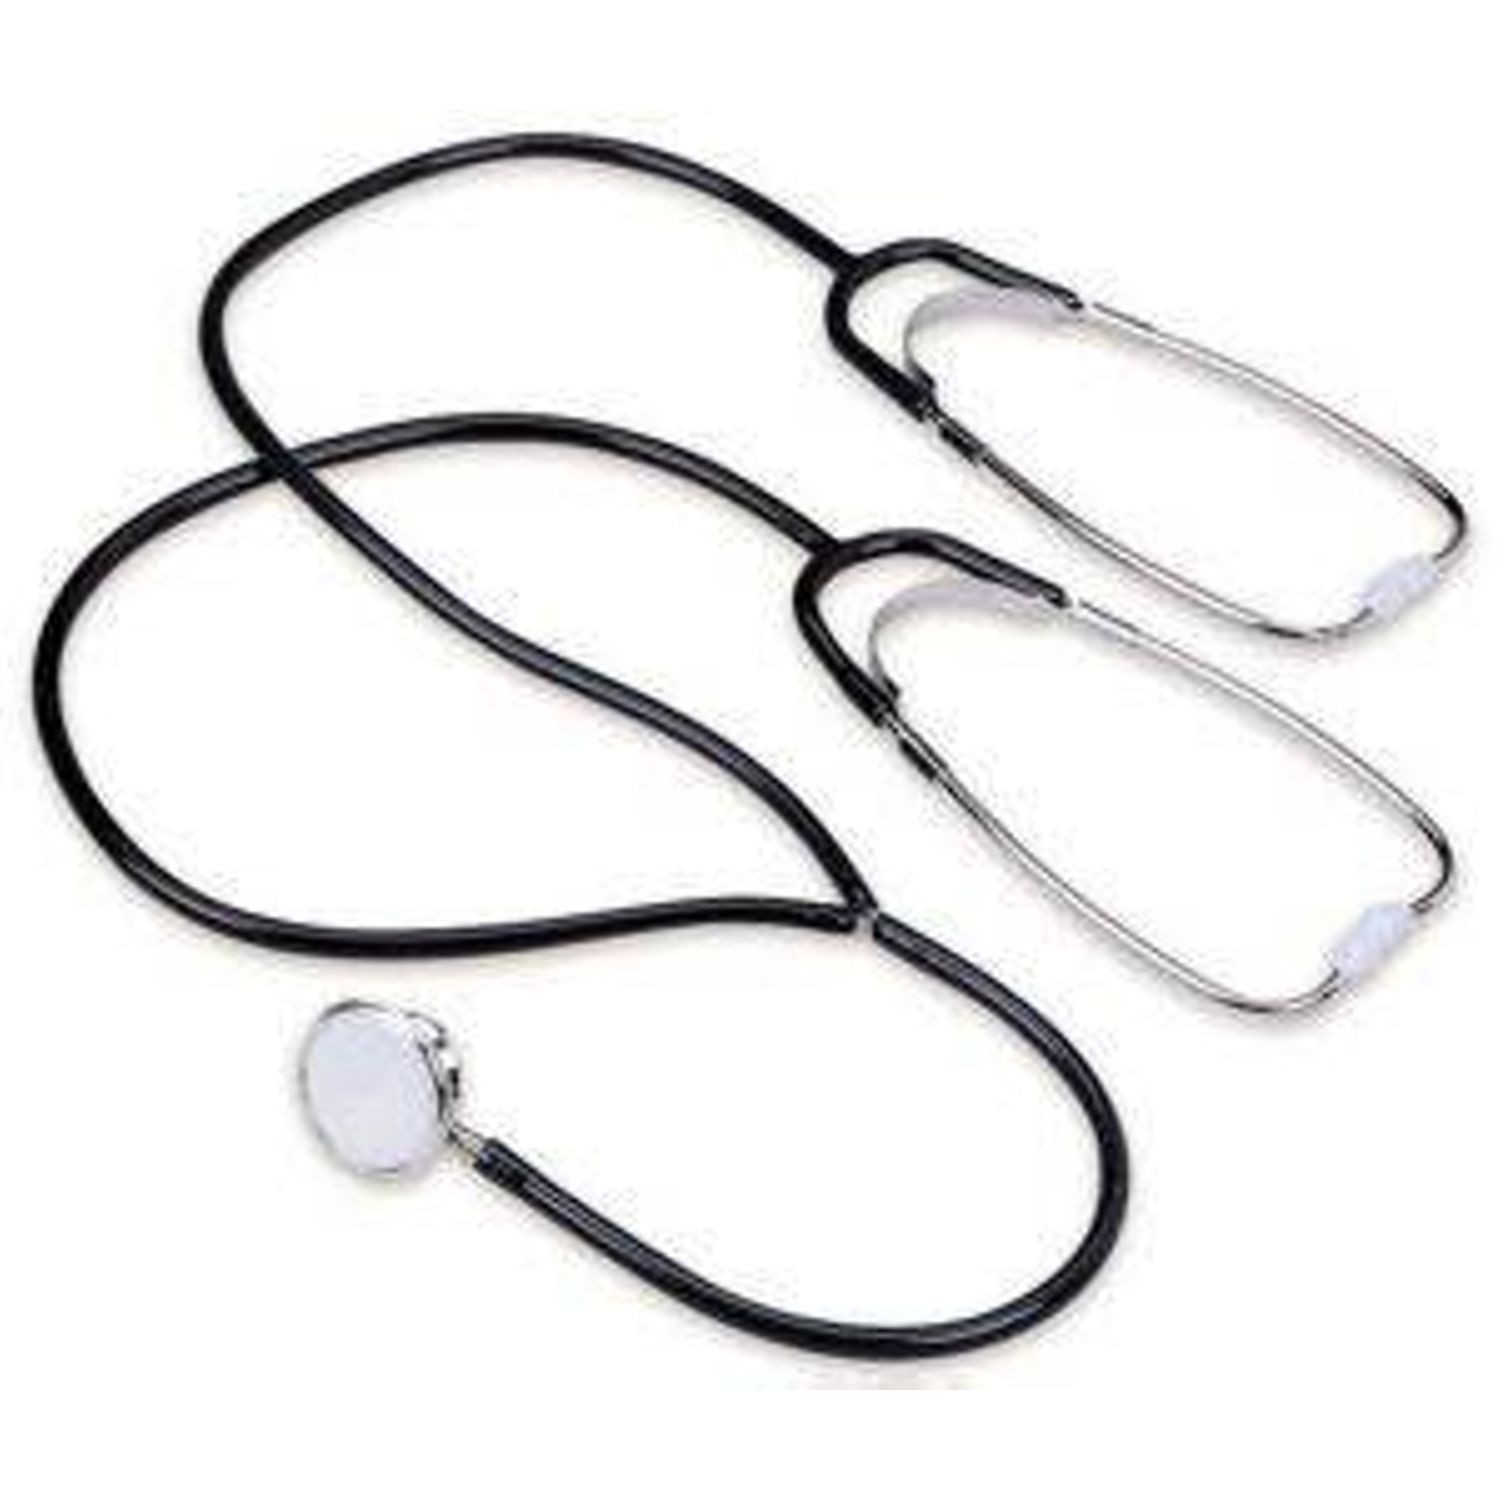 Dual Training Stethoscope | Armstrong Medical